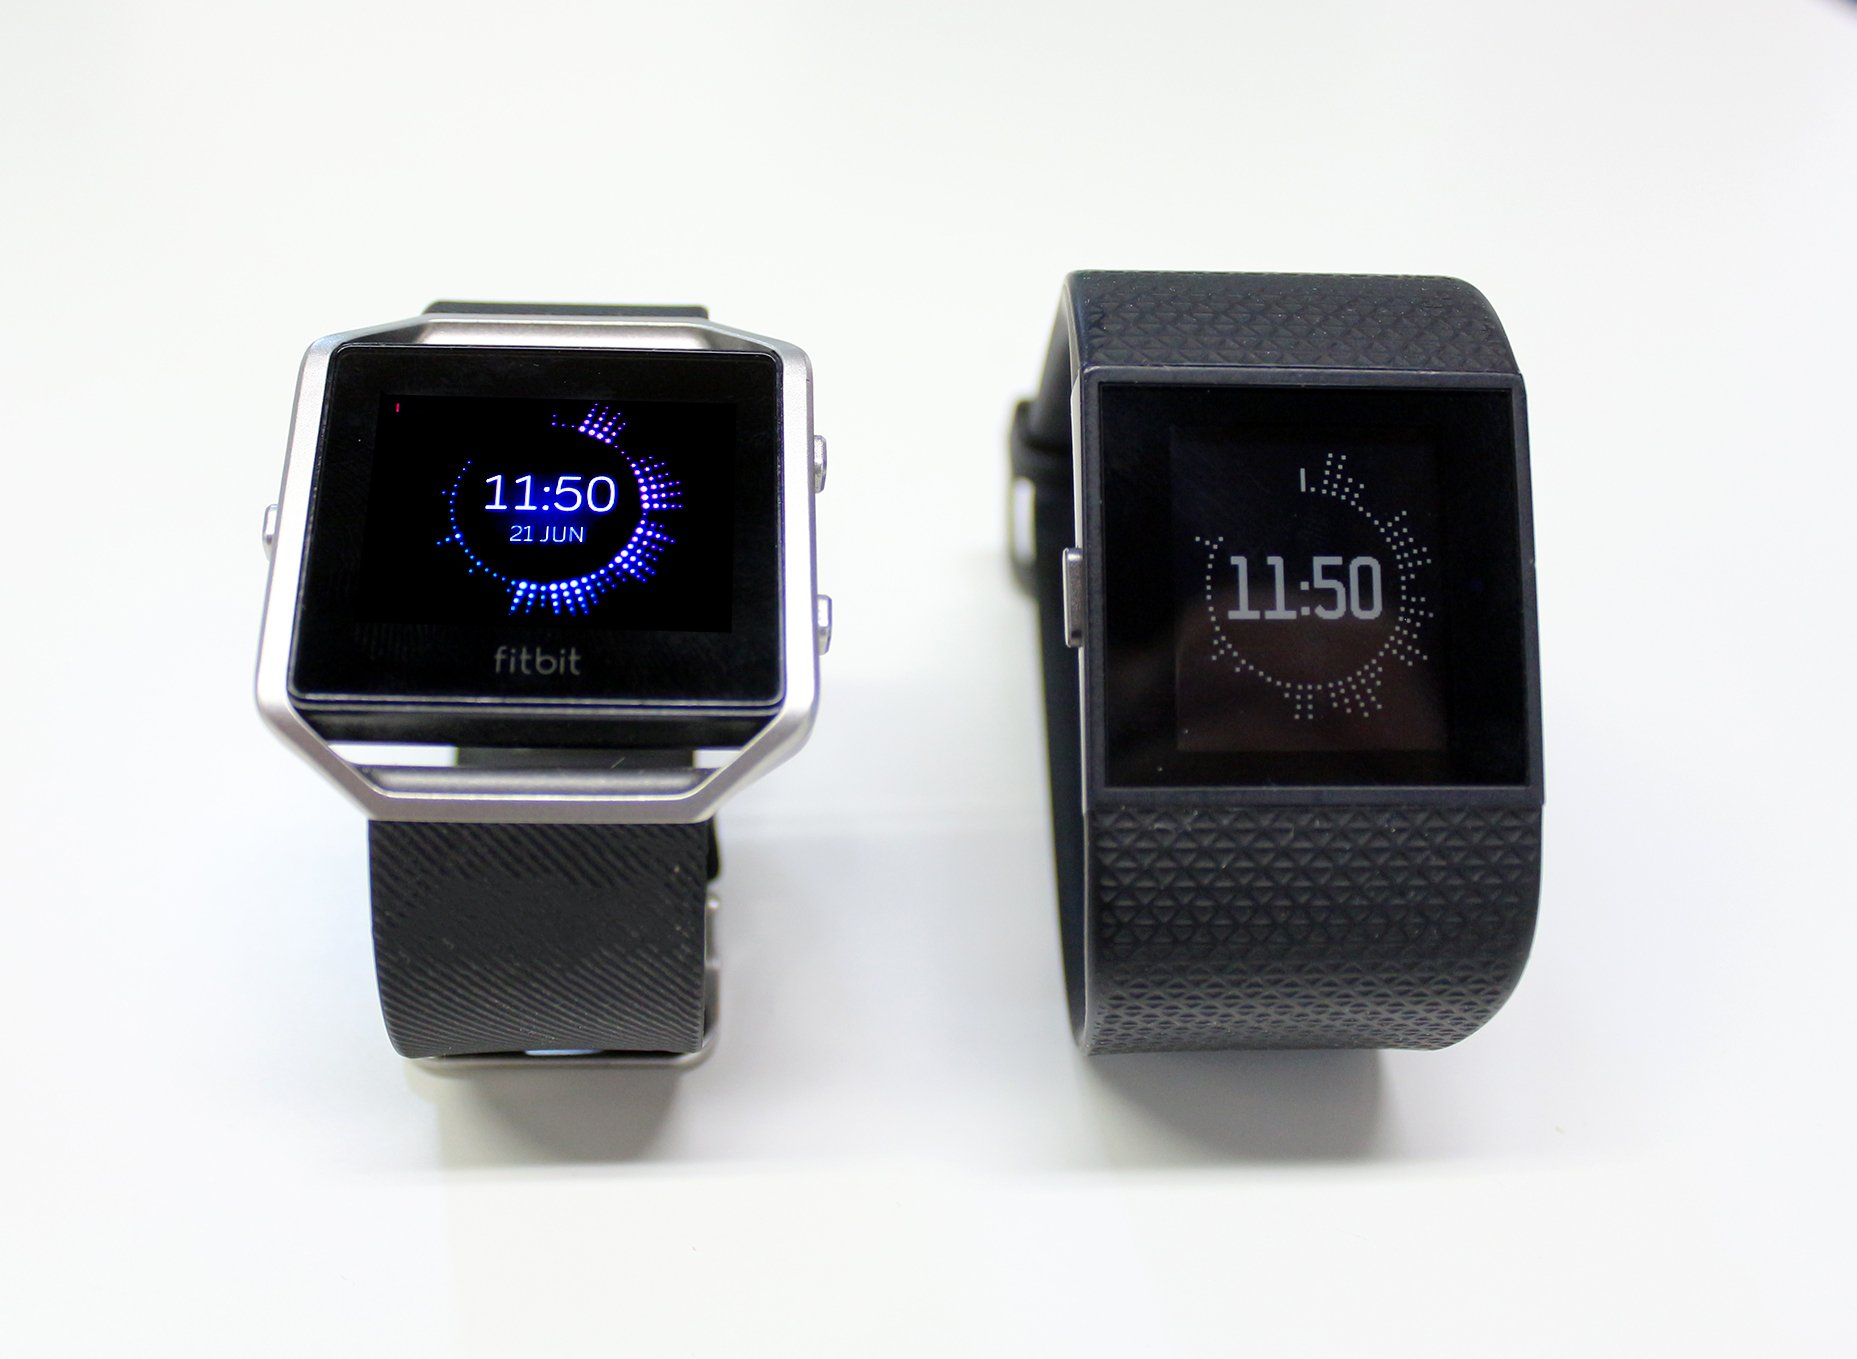 The Fitbit Blaze and Fitbit Surge